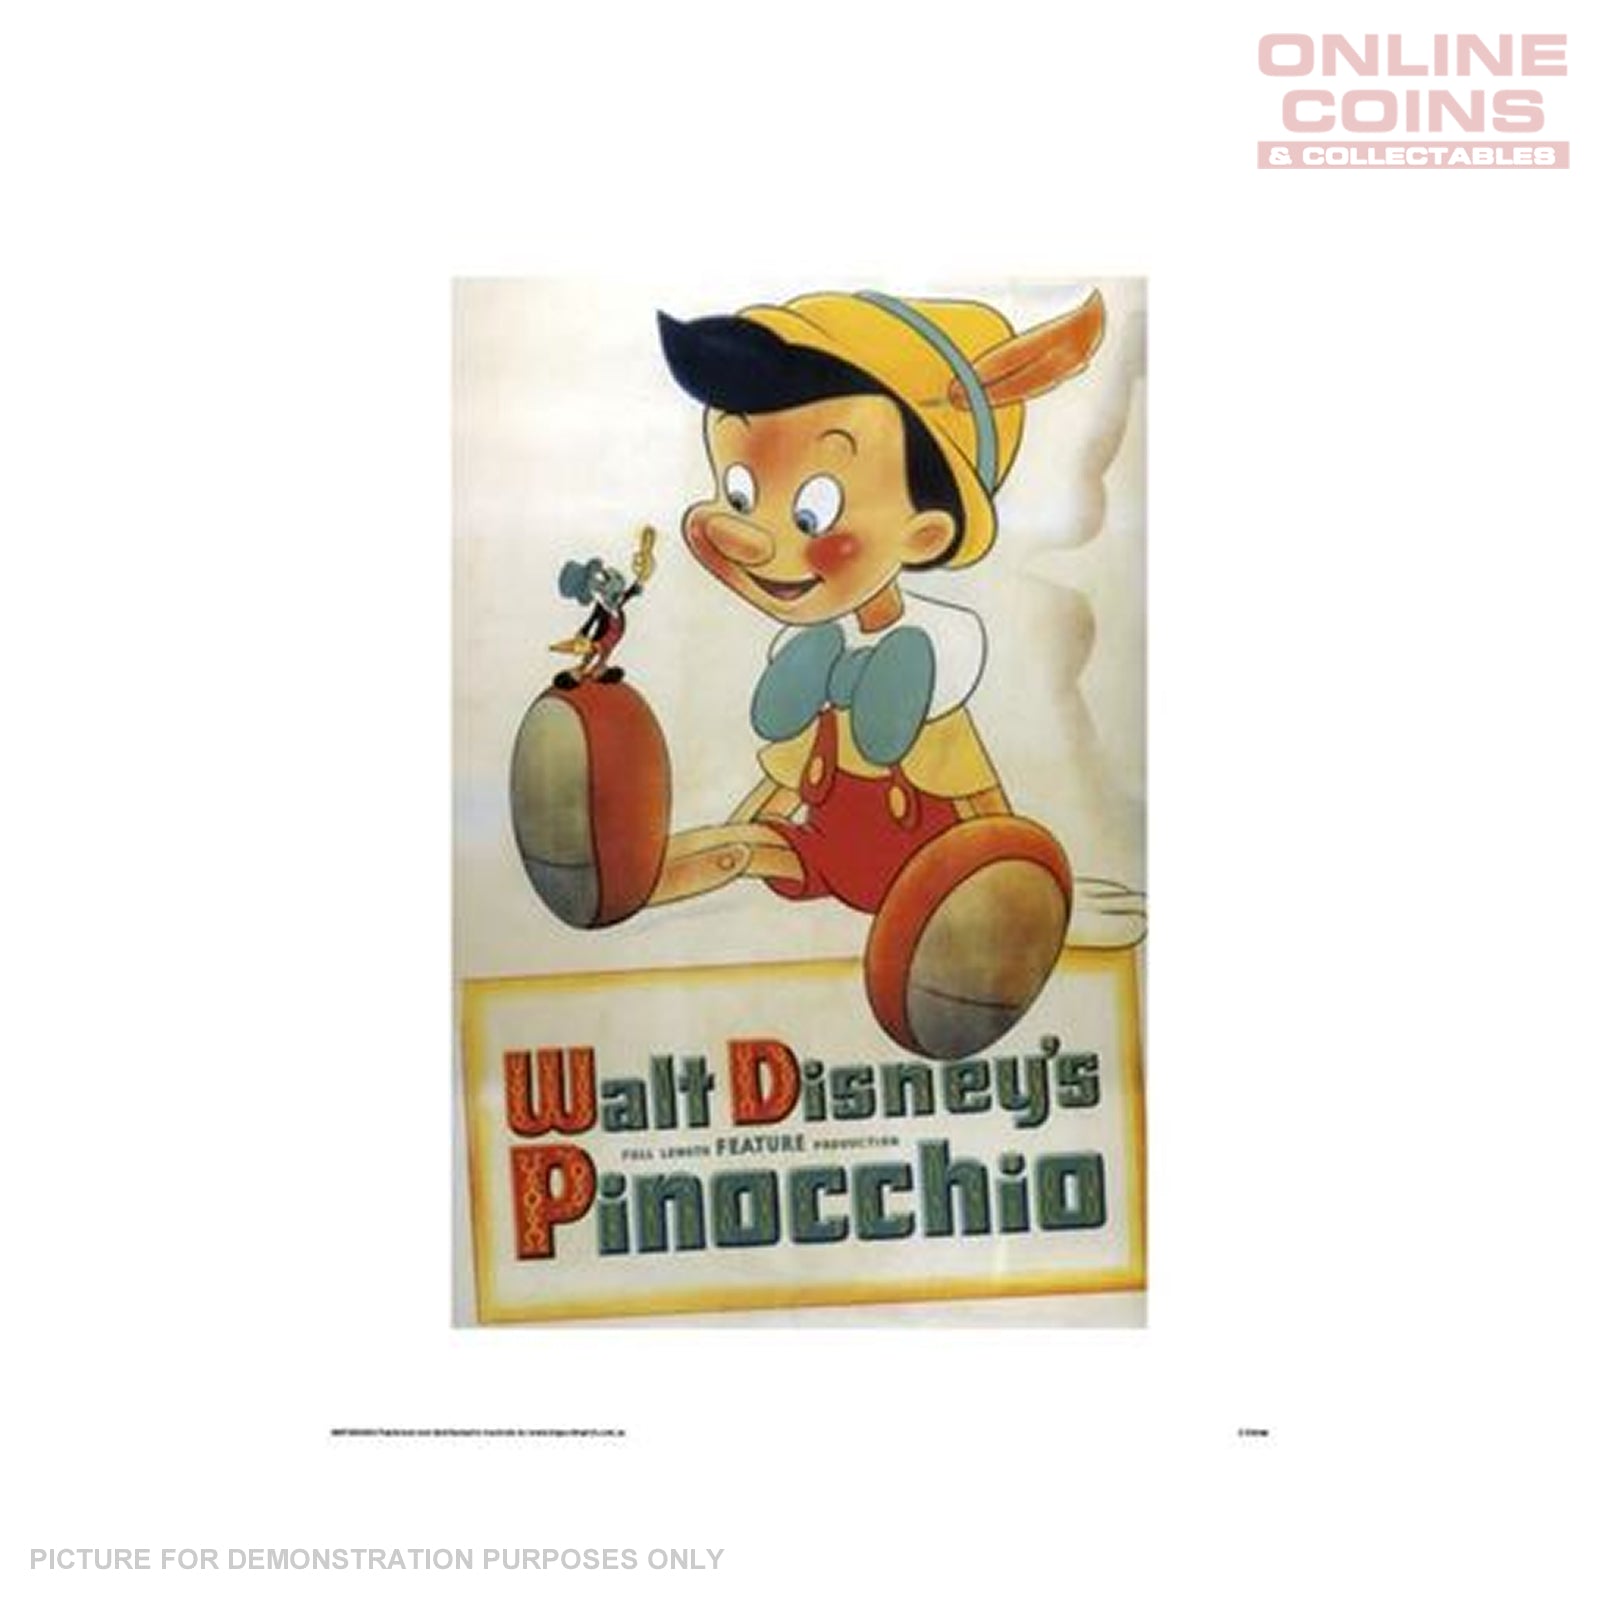 Disney Officially Licensed Art Print - Pinocchio Movie Poster